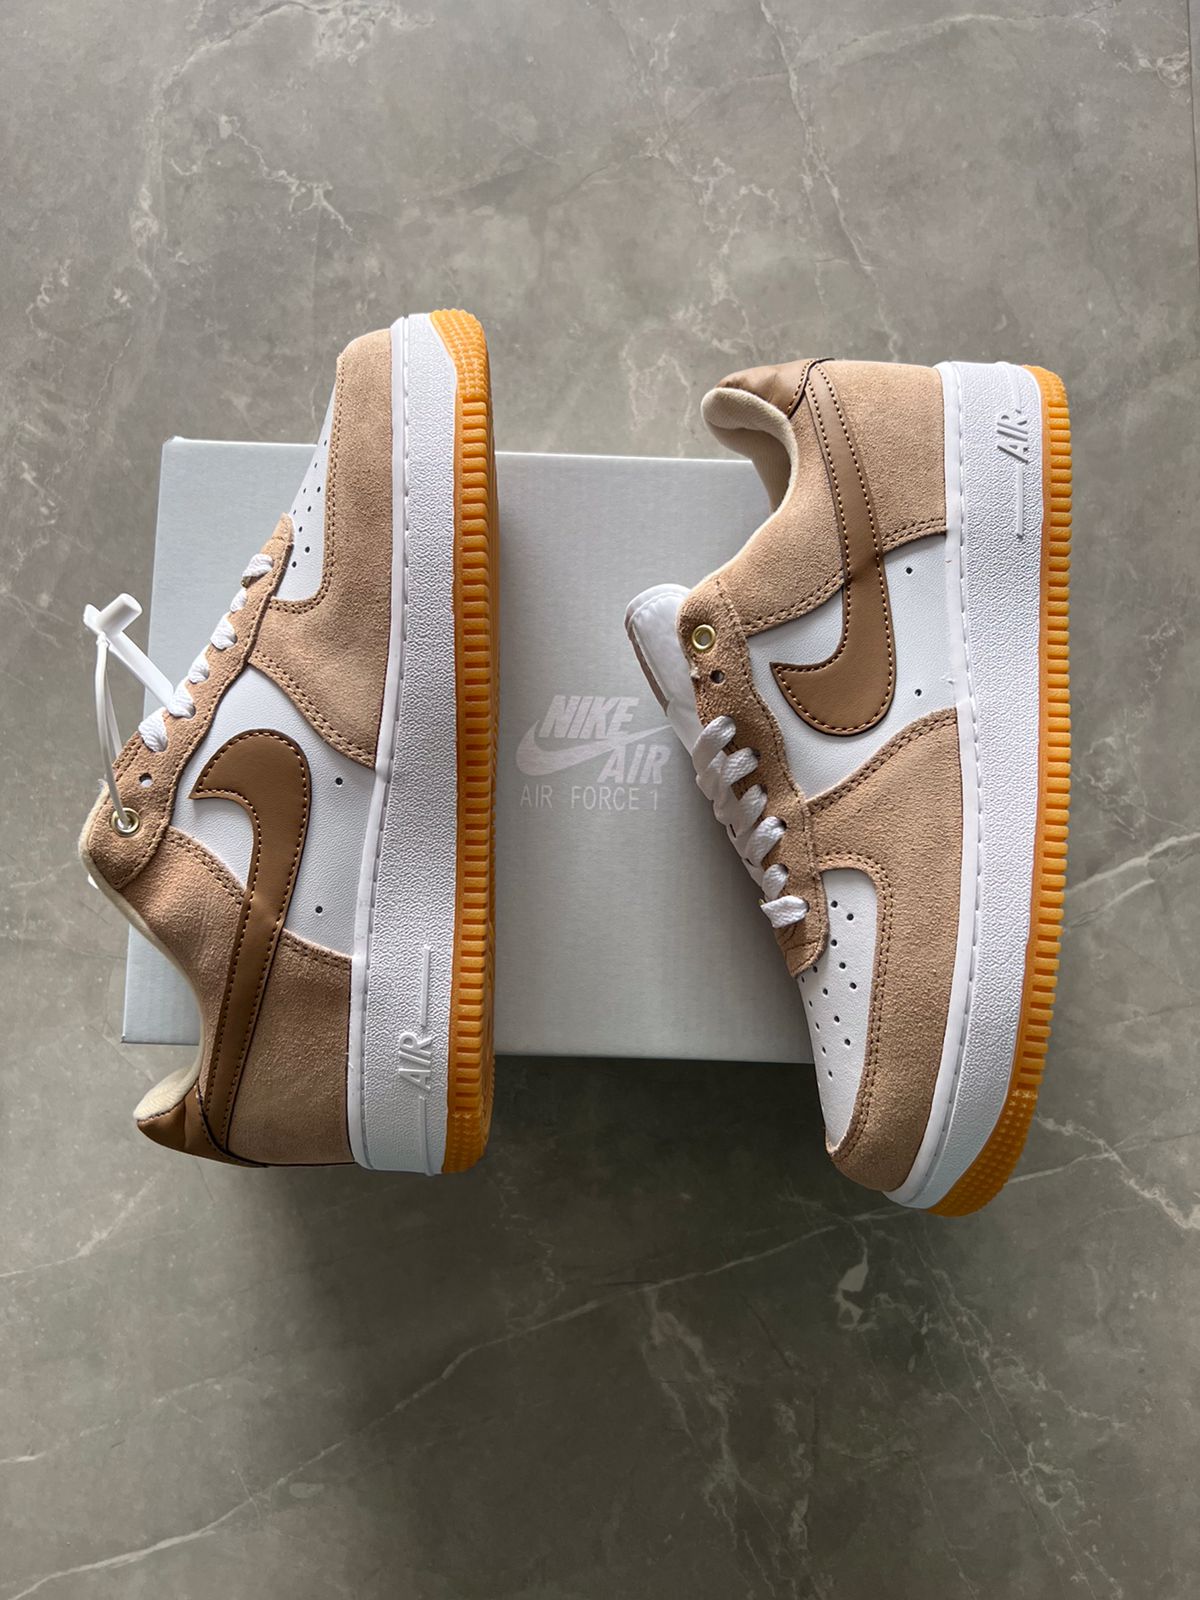 Airforce One Lxx Sneakers